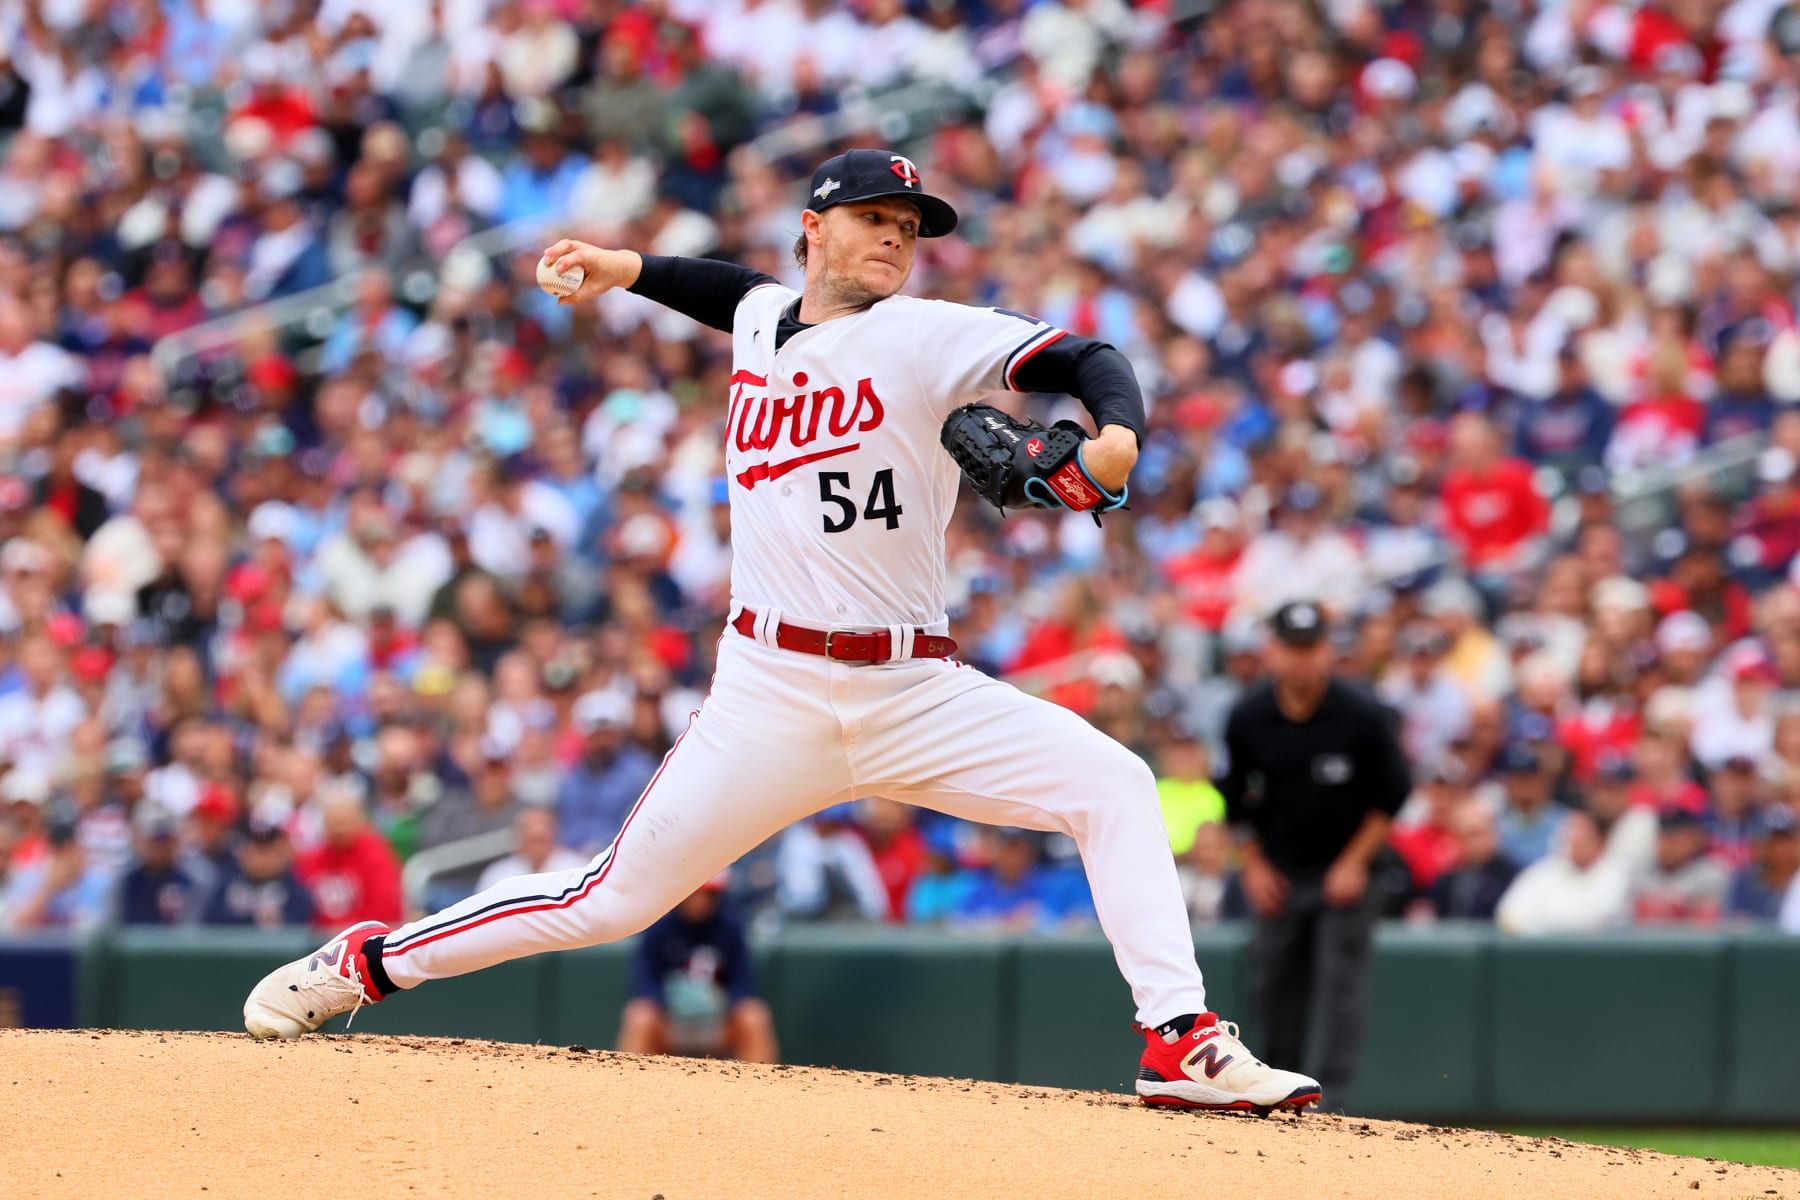 Sonny Gray on possible future with Twins before hitting free agency